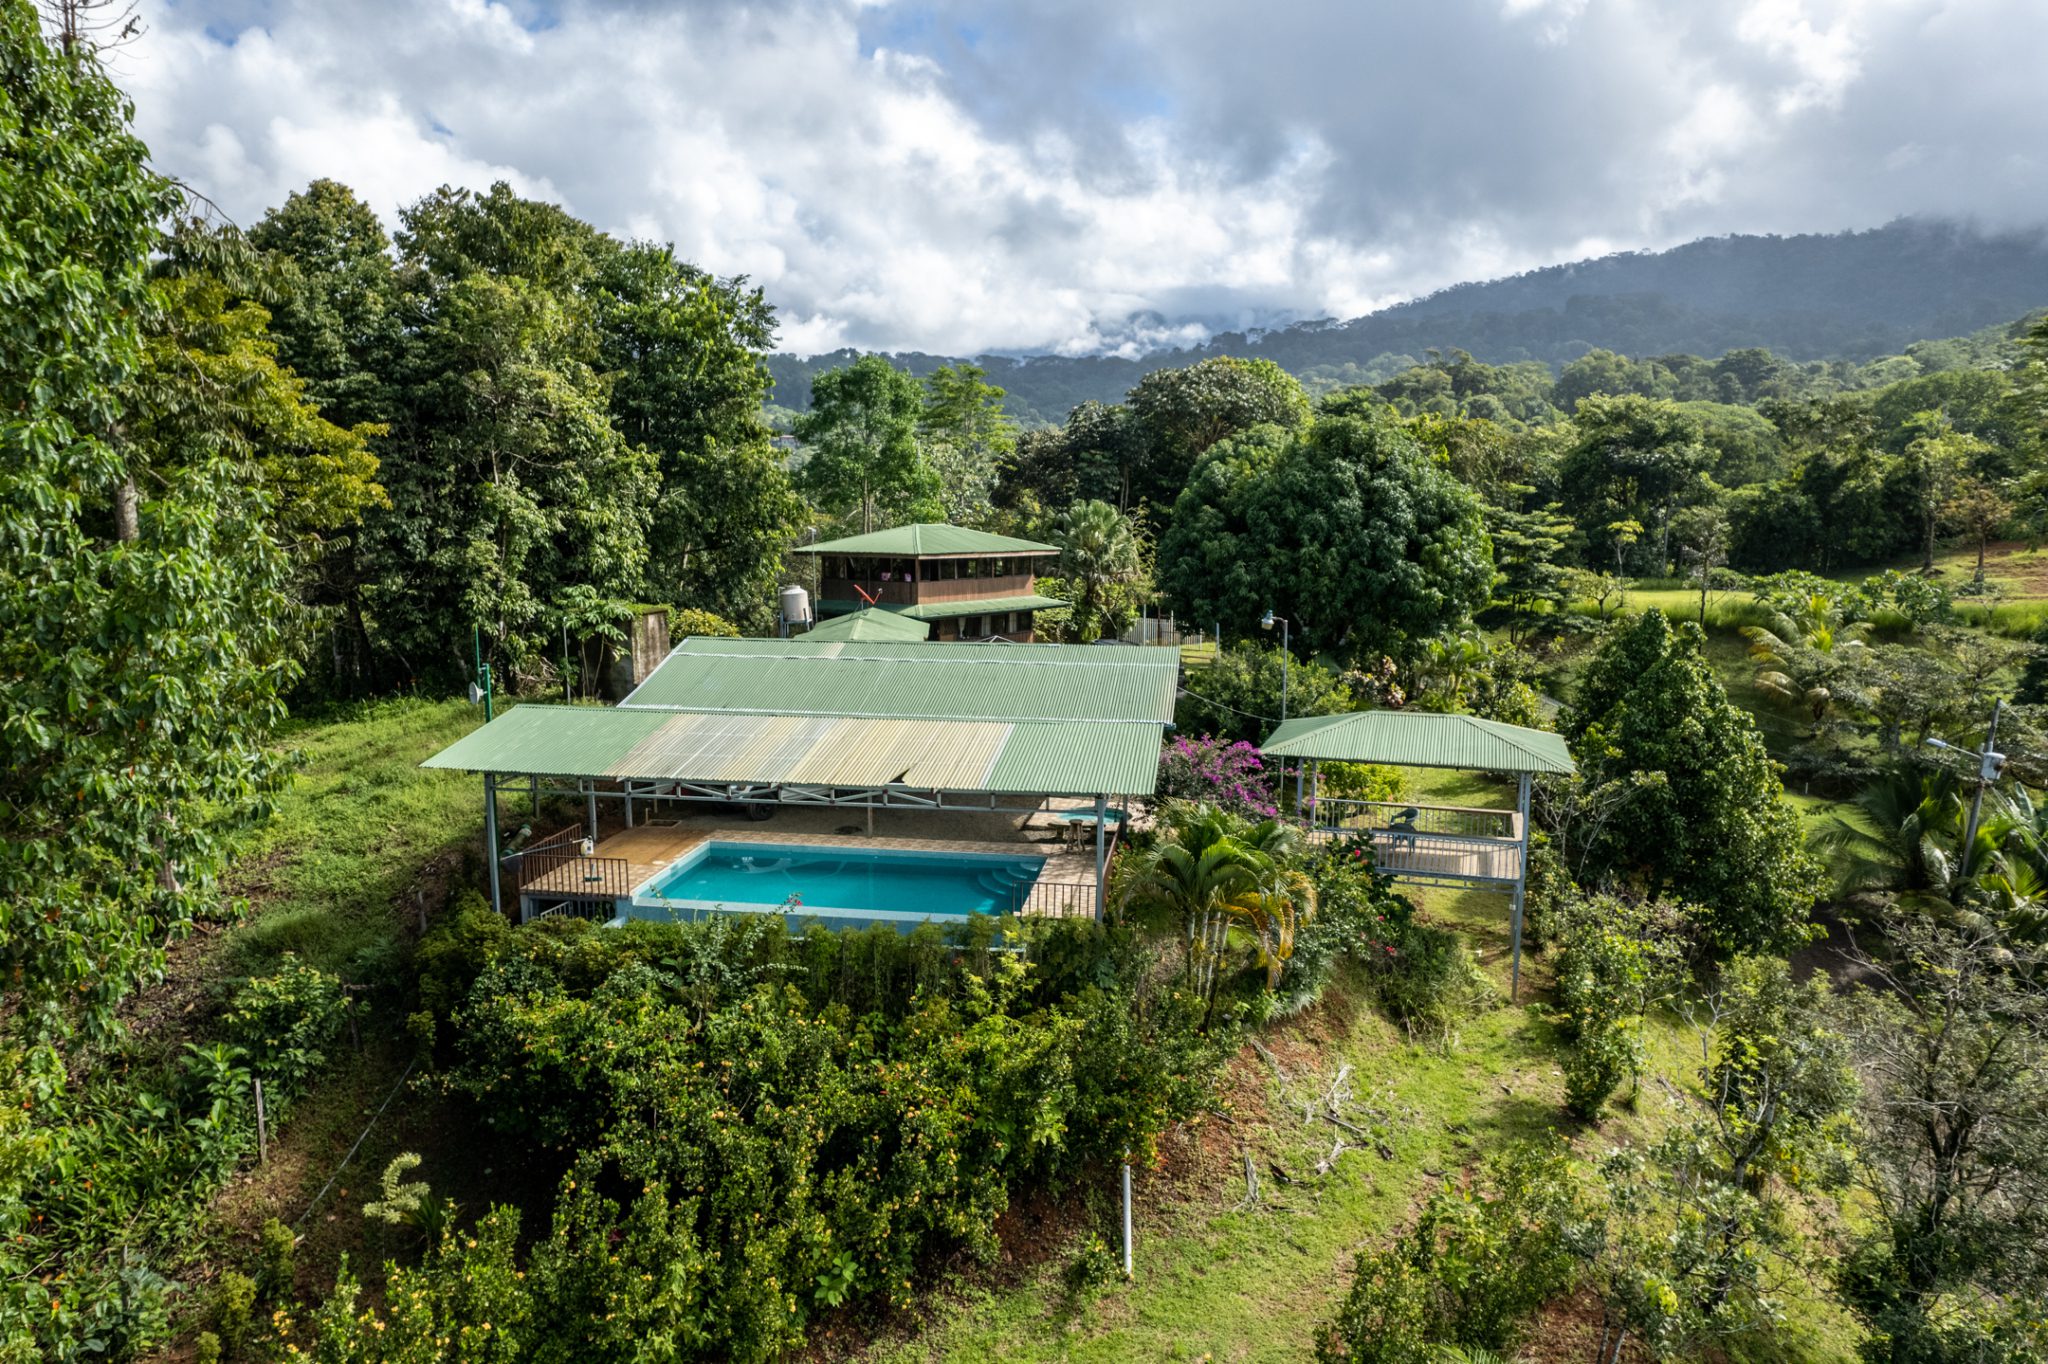 Start your Ocean View Uvita Estate with Casita + Rancho + Pool